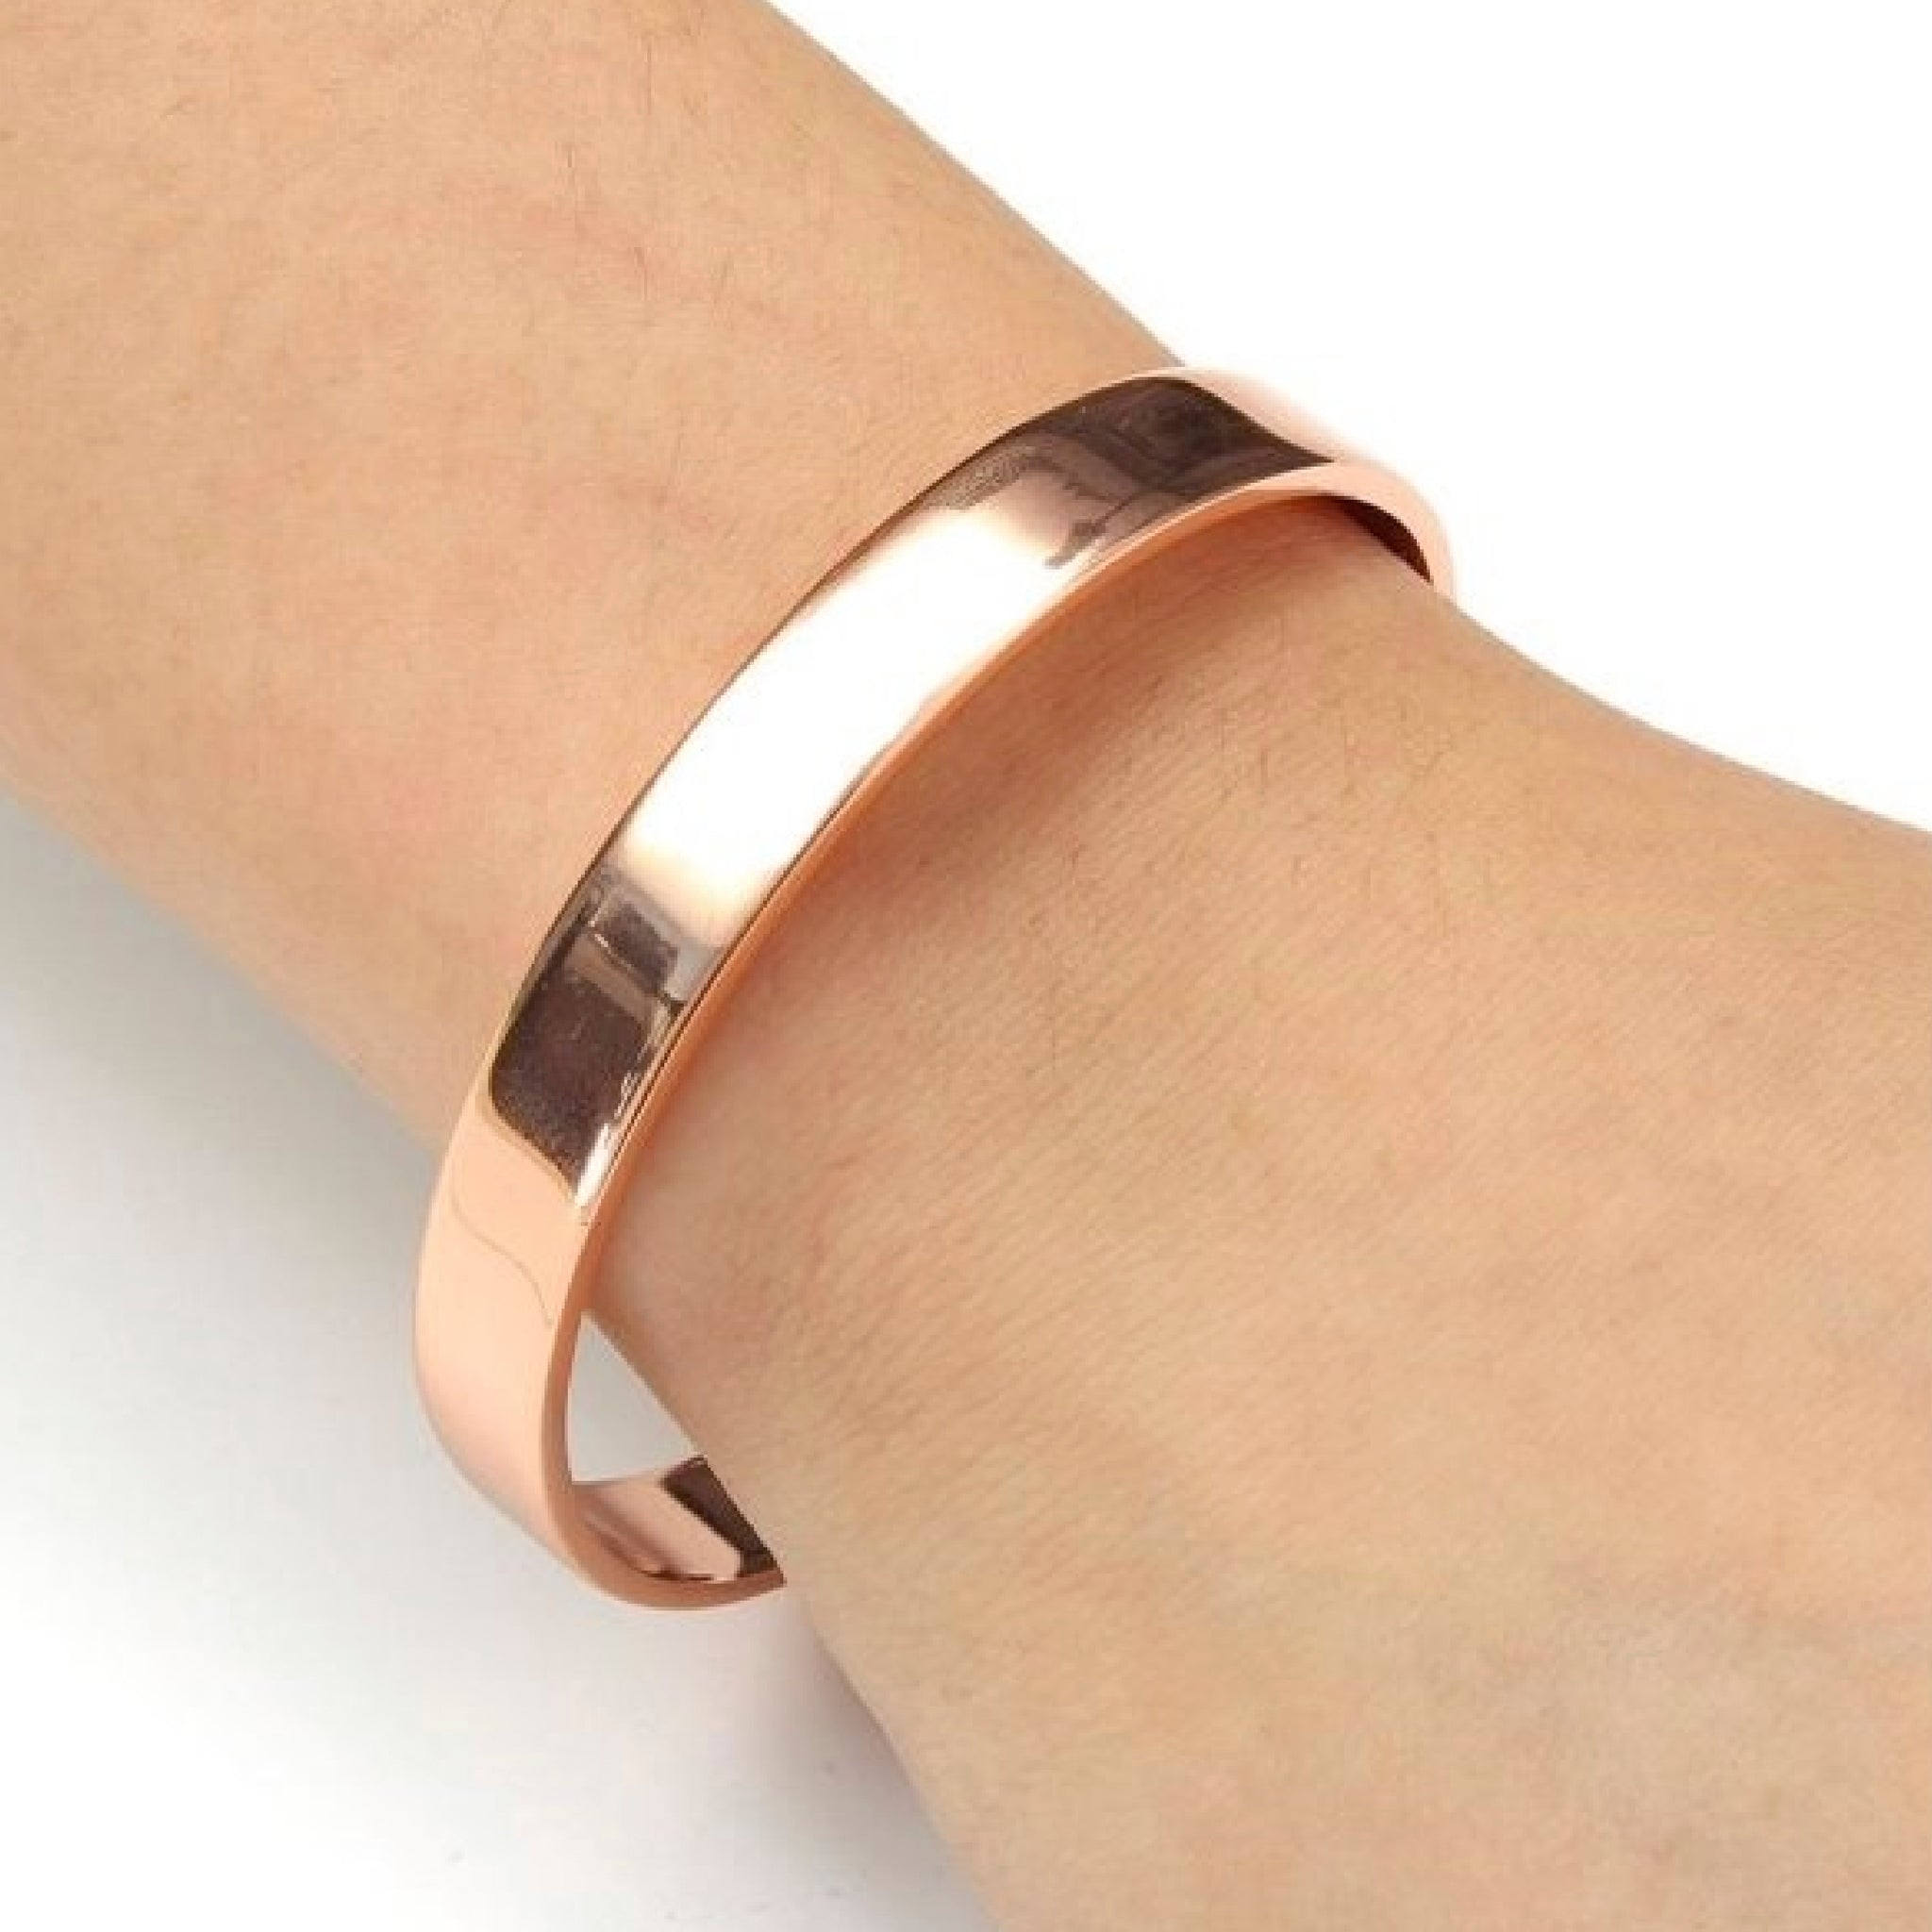 Embrace Health and Style with Our Sleek Pure Copper Magnetic Bracelet